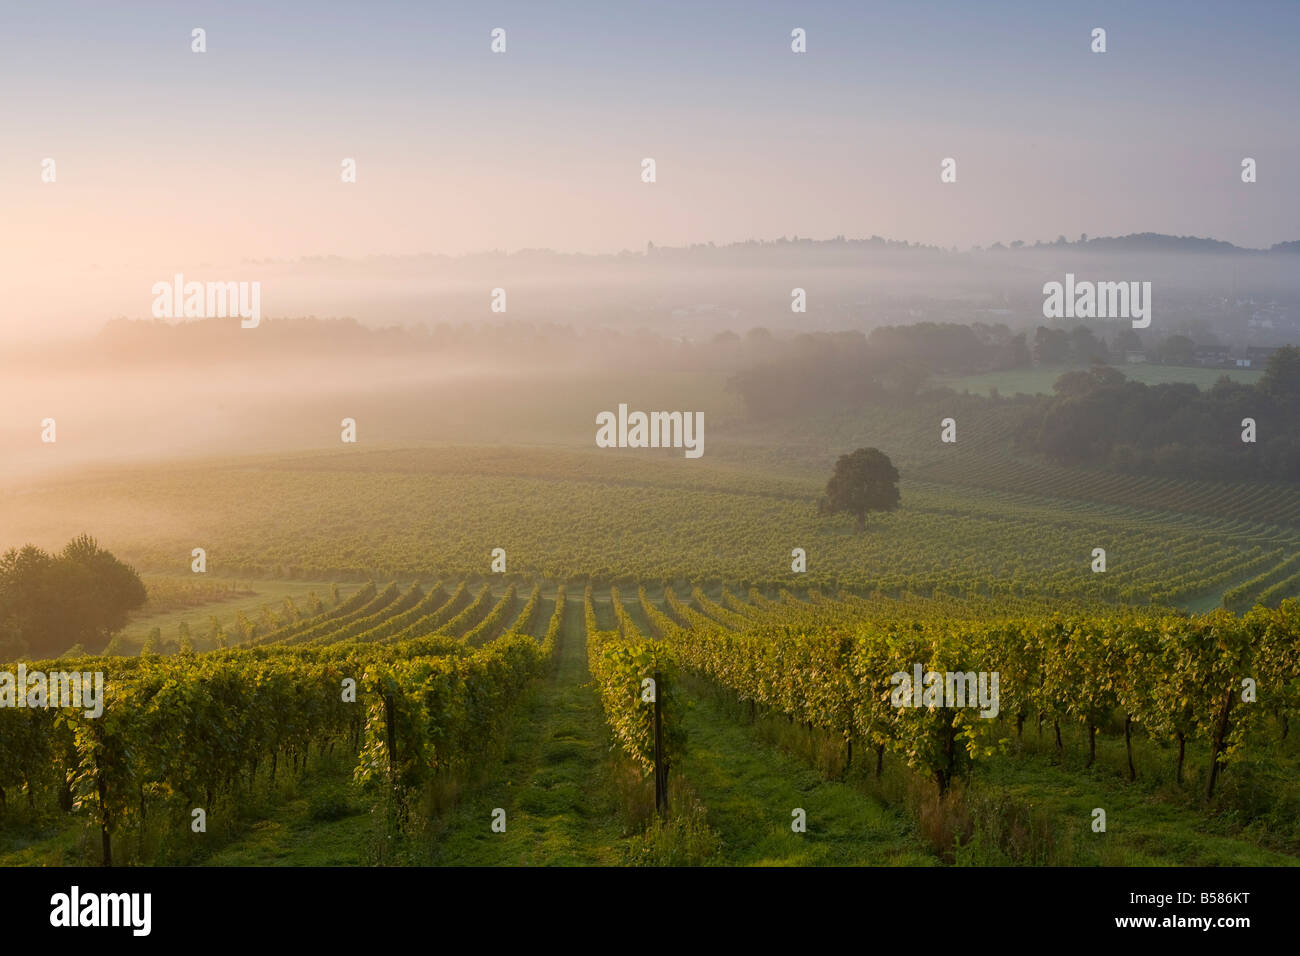 Early morning mist over vineyard, The North Downs, Dorking, Surrey, England, United Kingdom, Europe Stock Photo